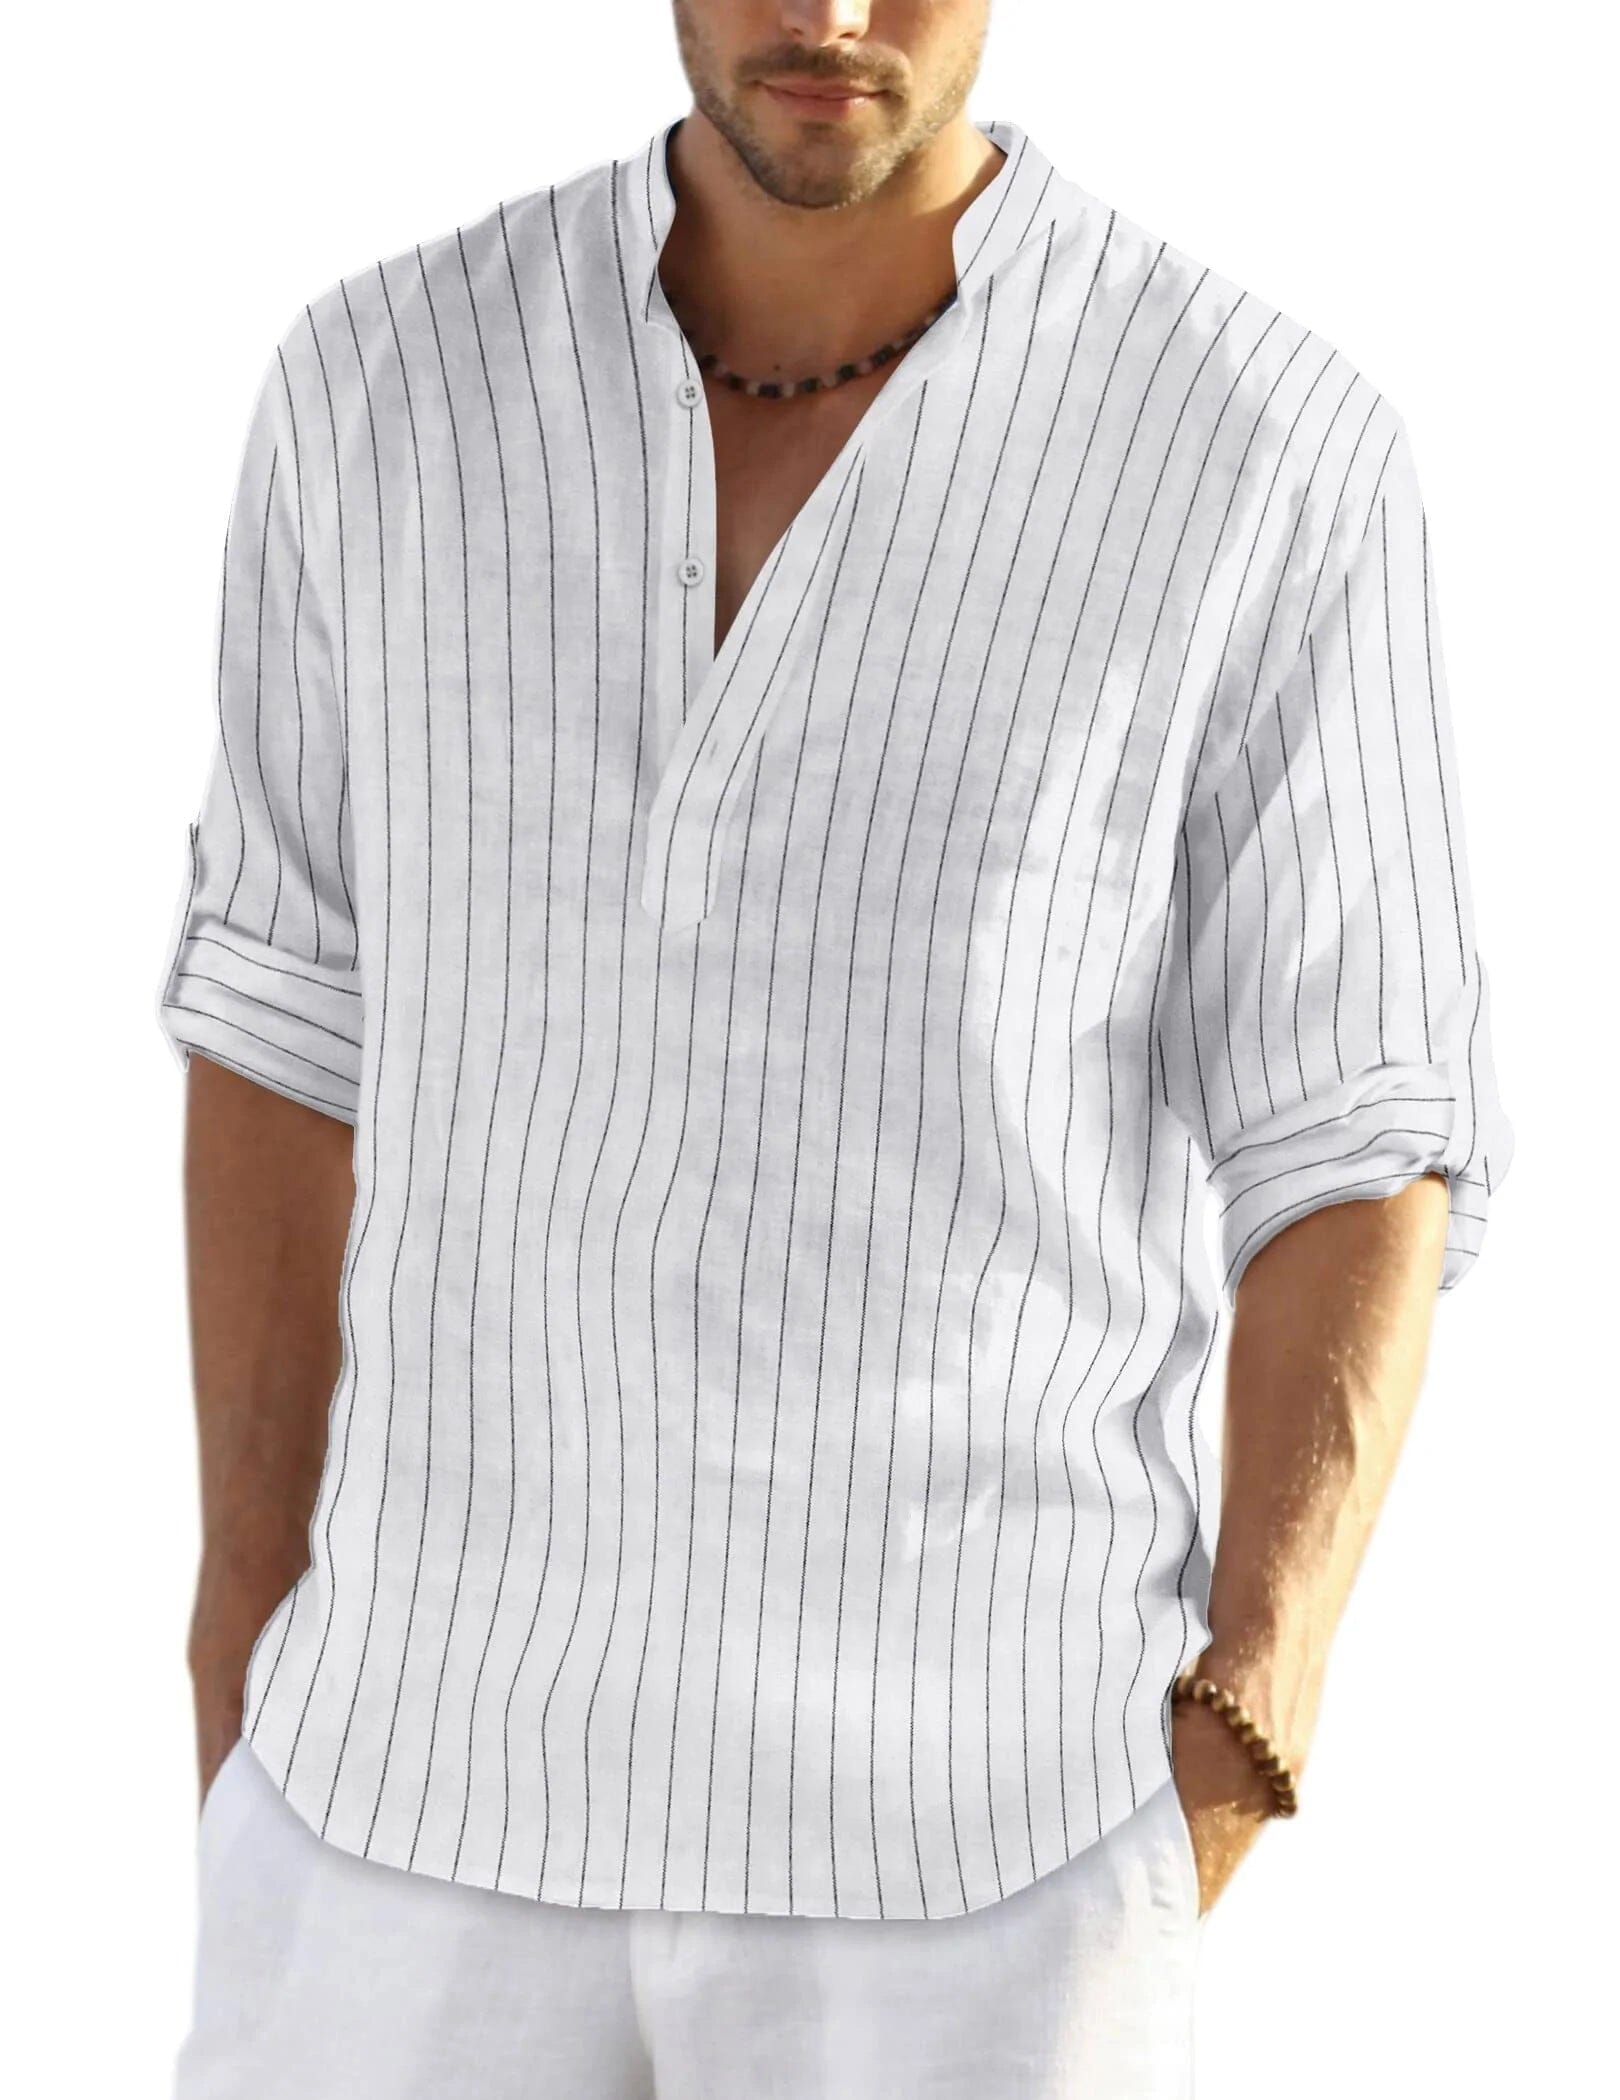 Coofandy Casual Beach Shirts (US Only) Shirts coofandy White Striped S 